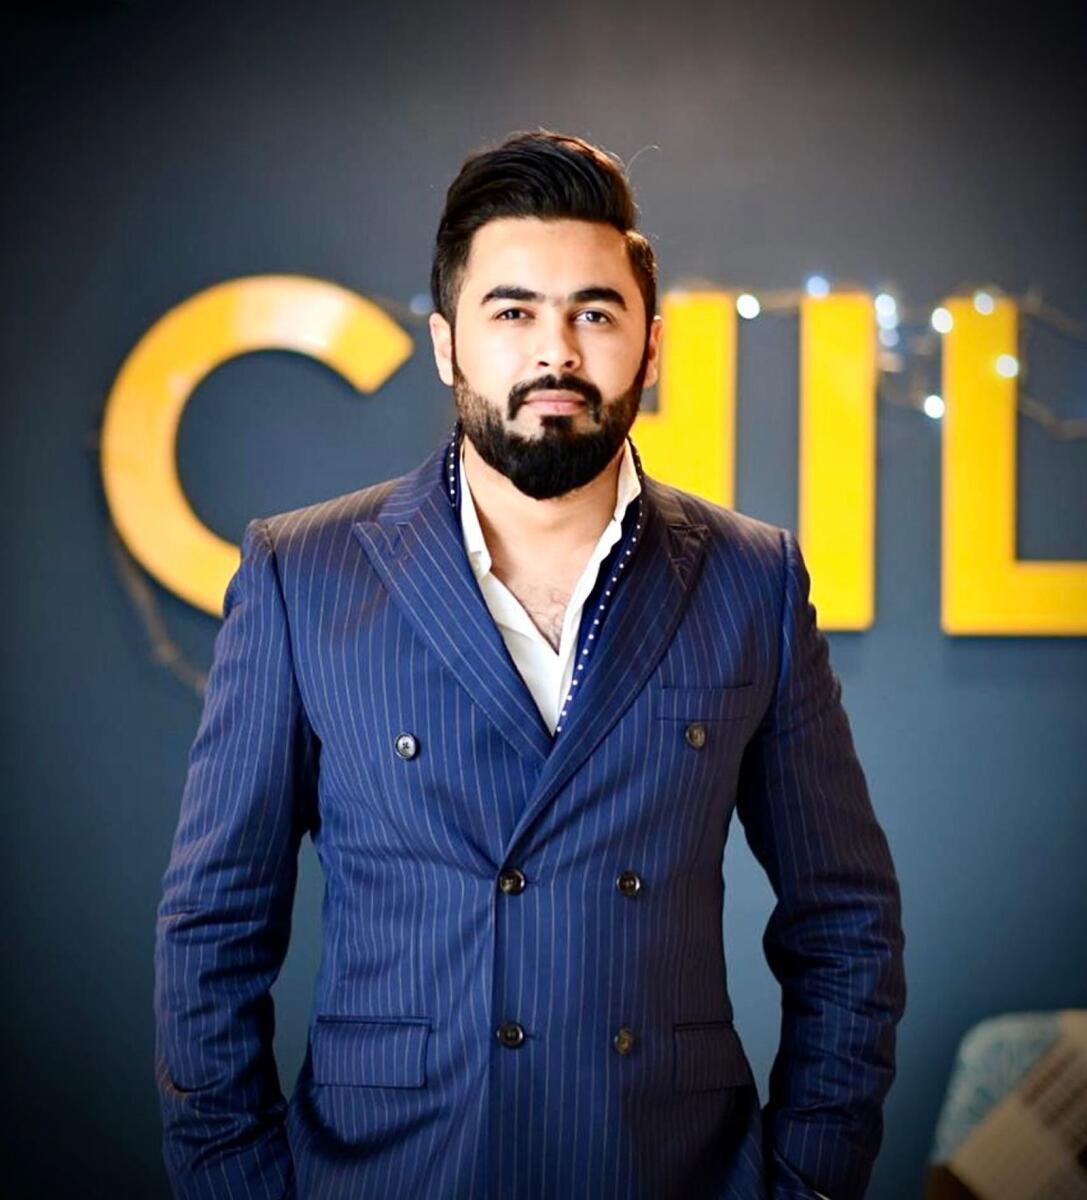 Salman Sarwar, Founder and CEO of Torque360, said his startup plans to introduce its concept in Dubai and the broader GCC region. The company sees an opportunity to serve the auto-repair industry in this dynamic market.